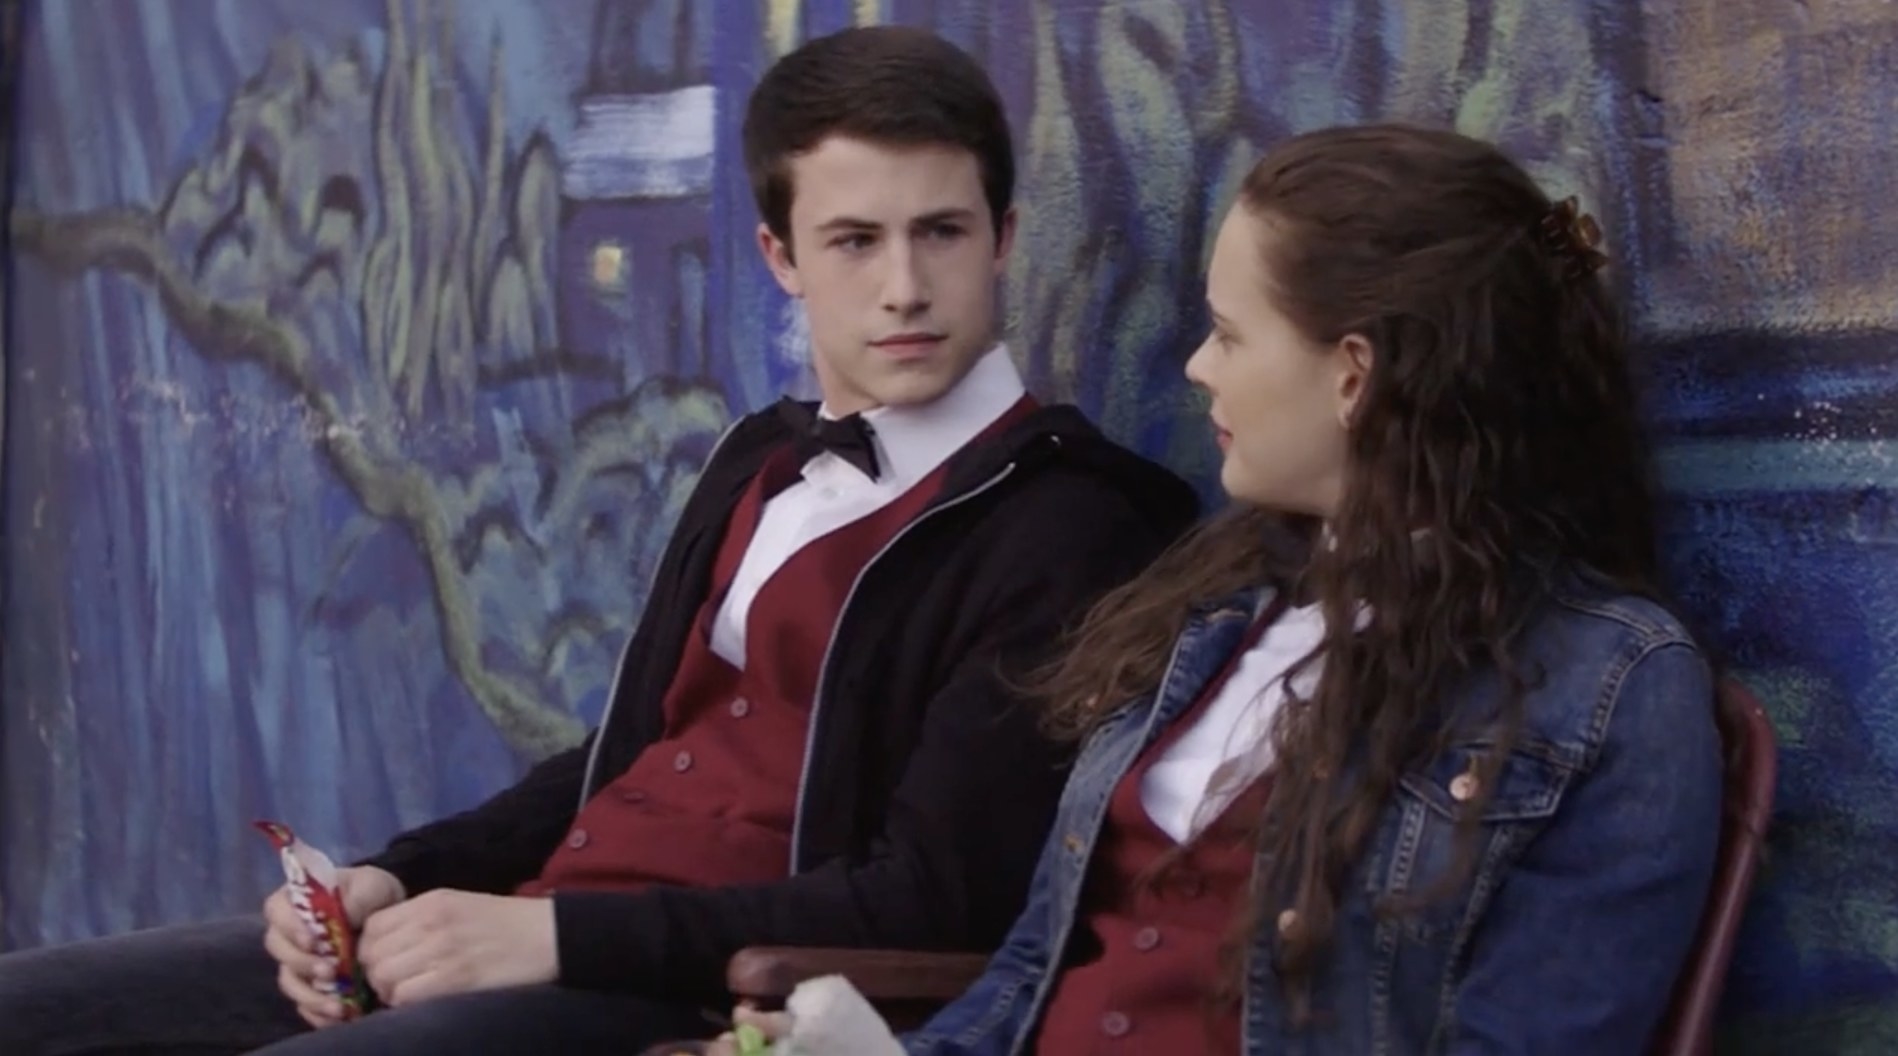 Dylan Minnette and Katherine Langford in 13 Reasons Why